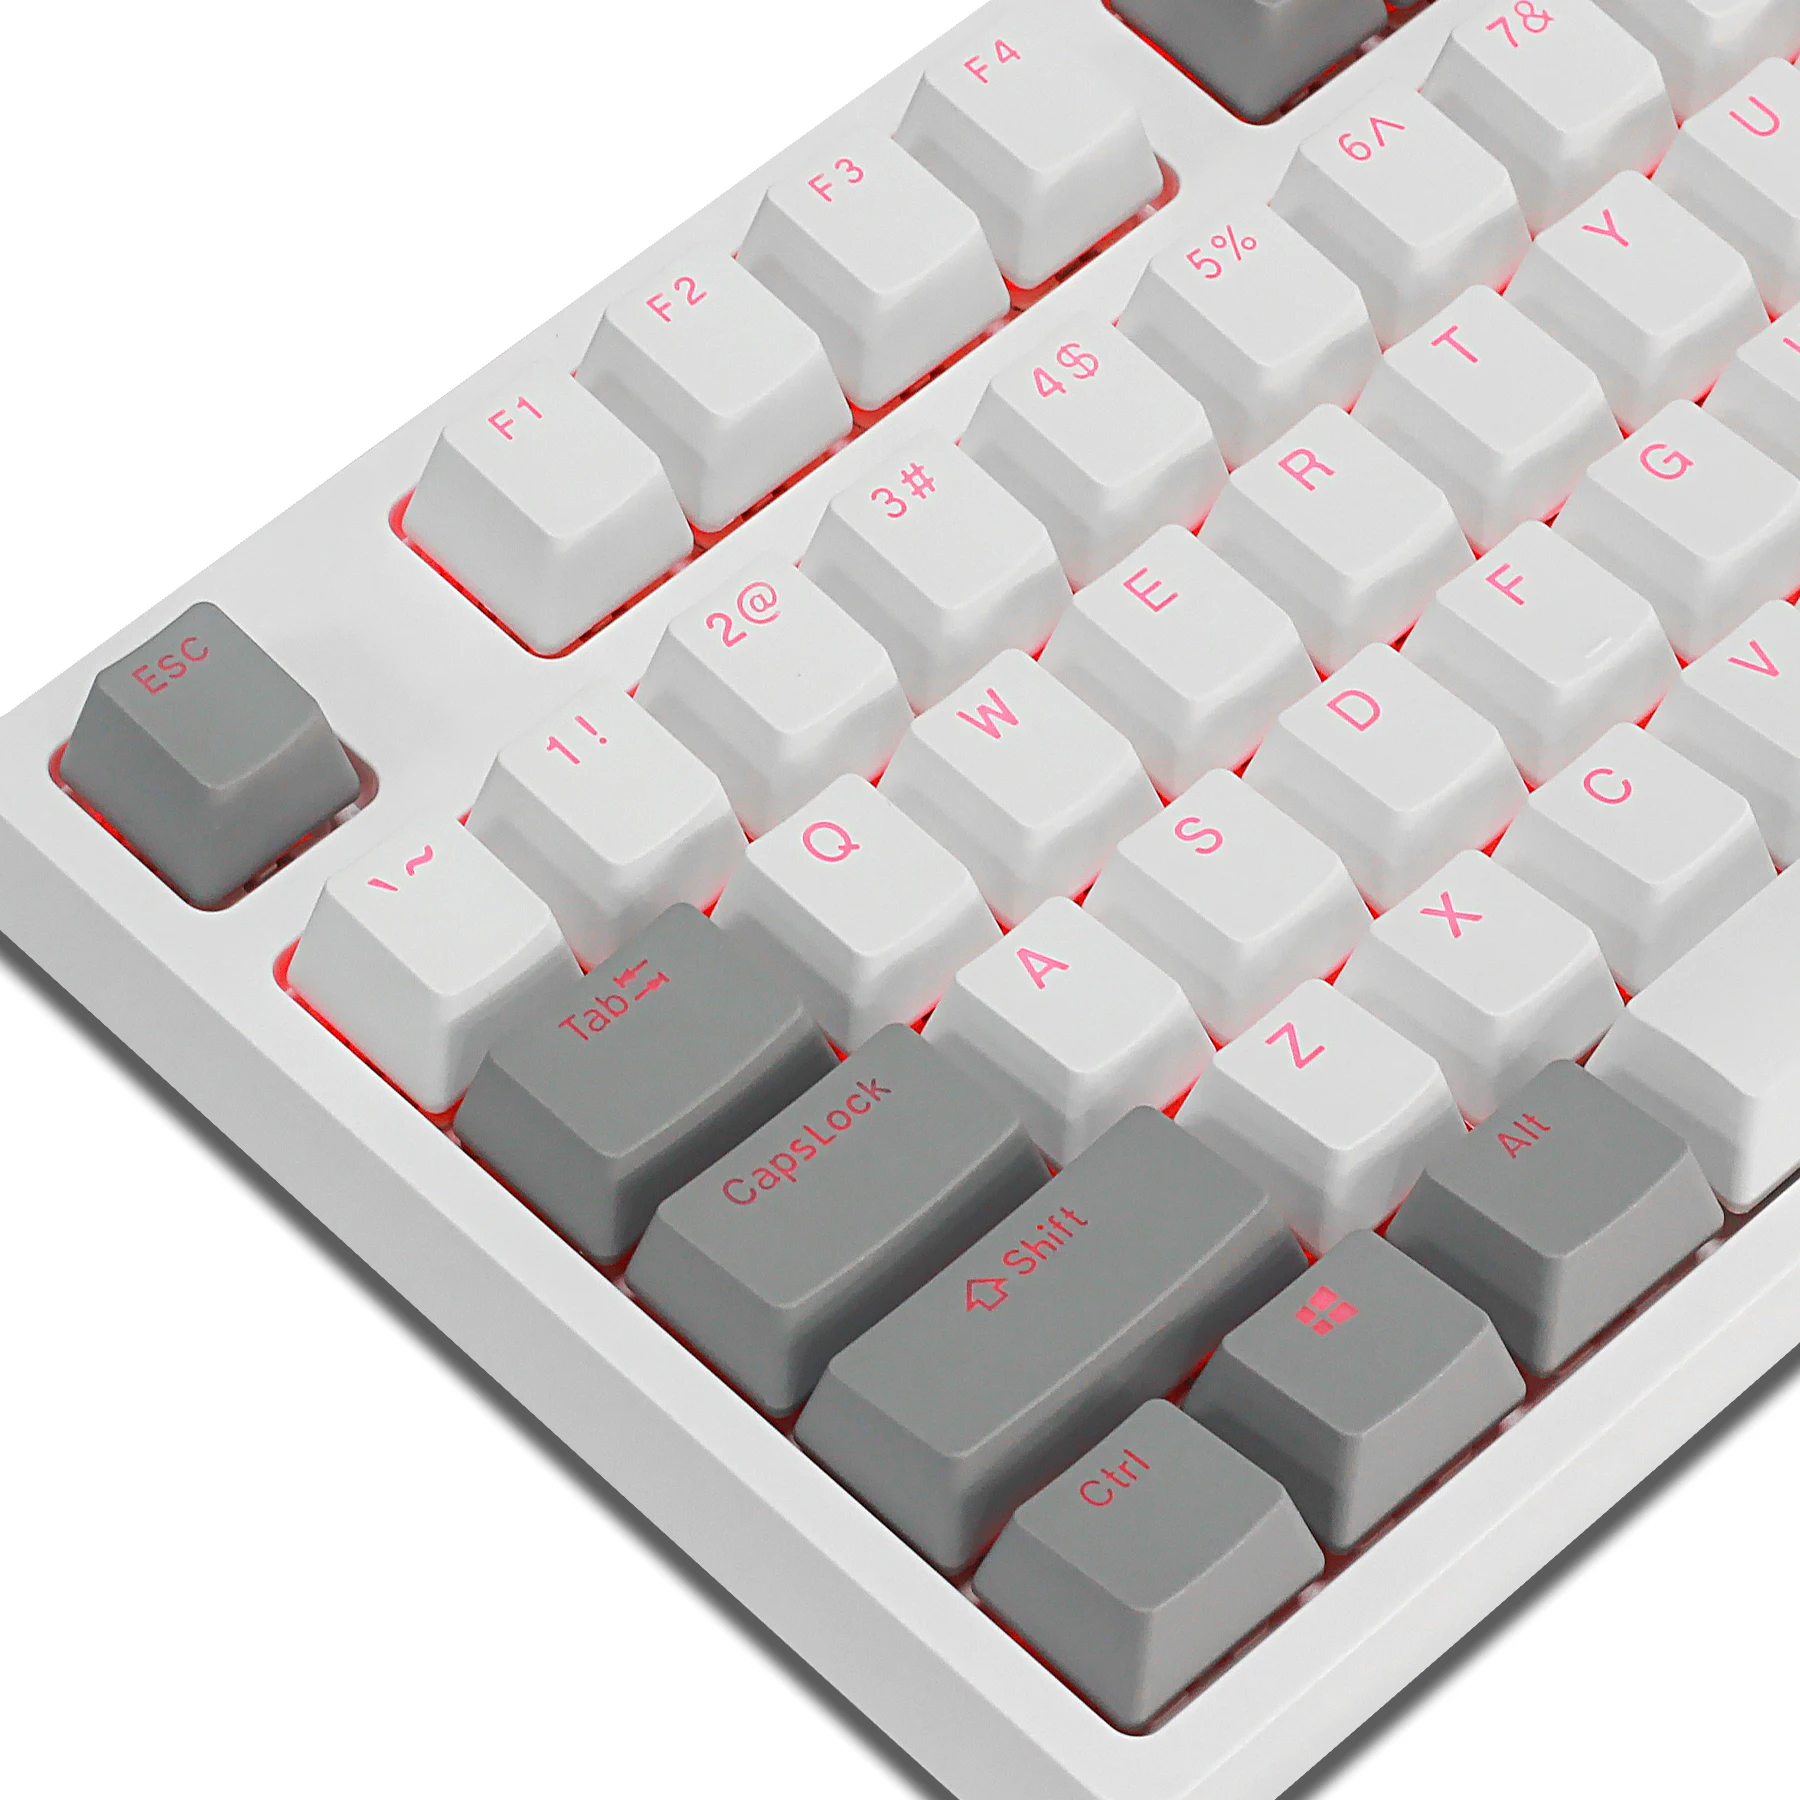 

PBT keycaps Grey white double shot OEM Profile key caps for 61 87 104 108 MX Switch gaming Mechanical keyboards